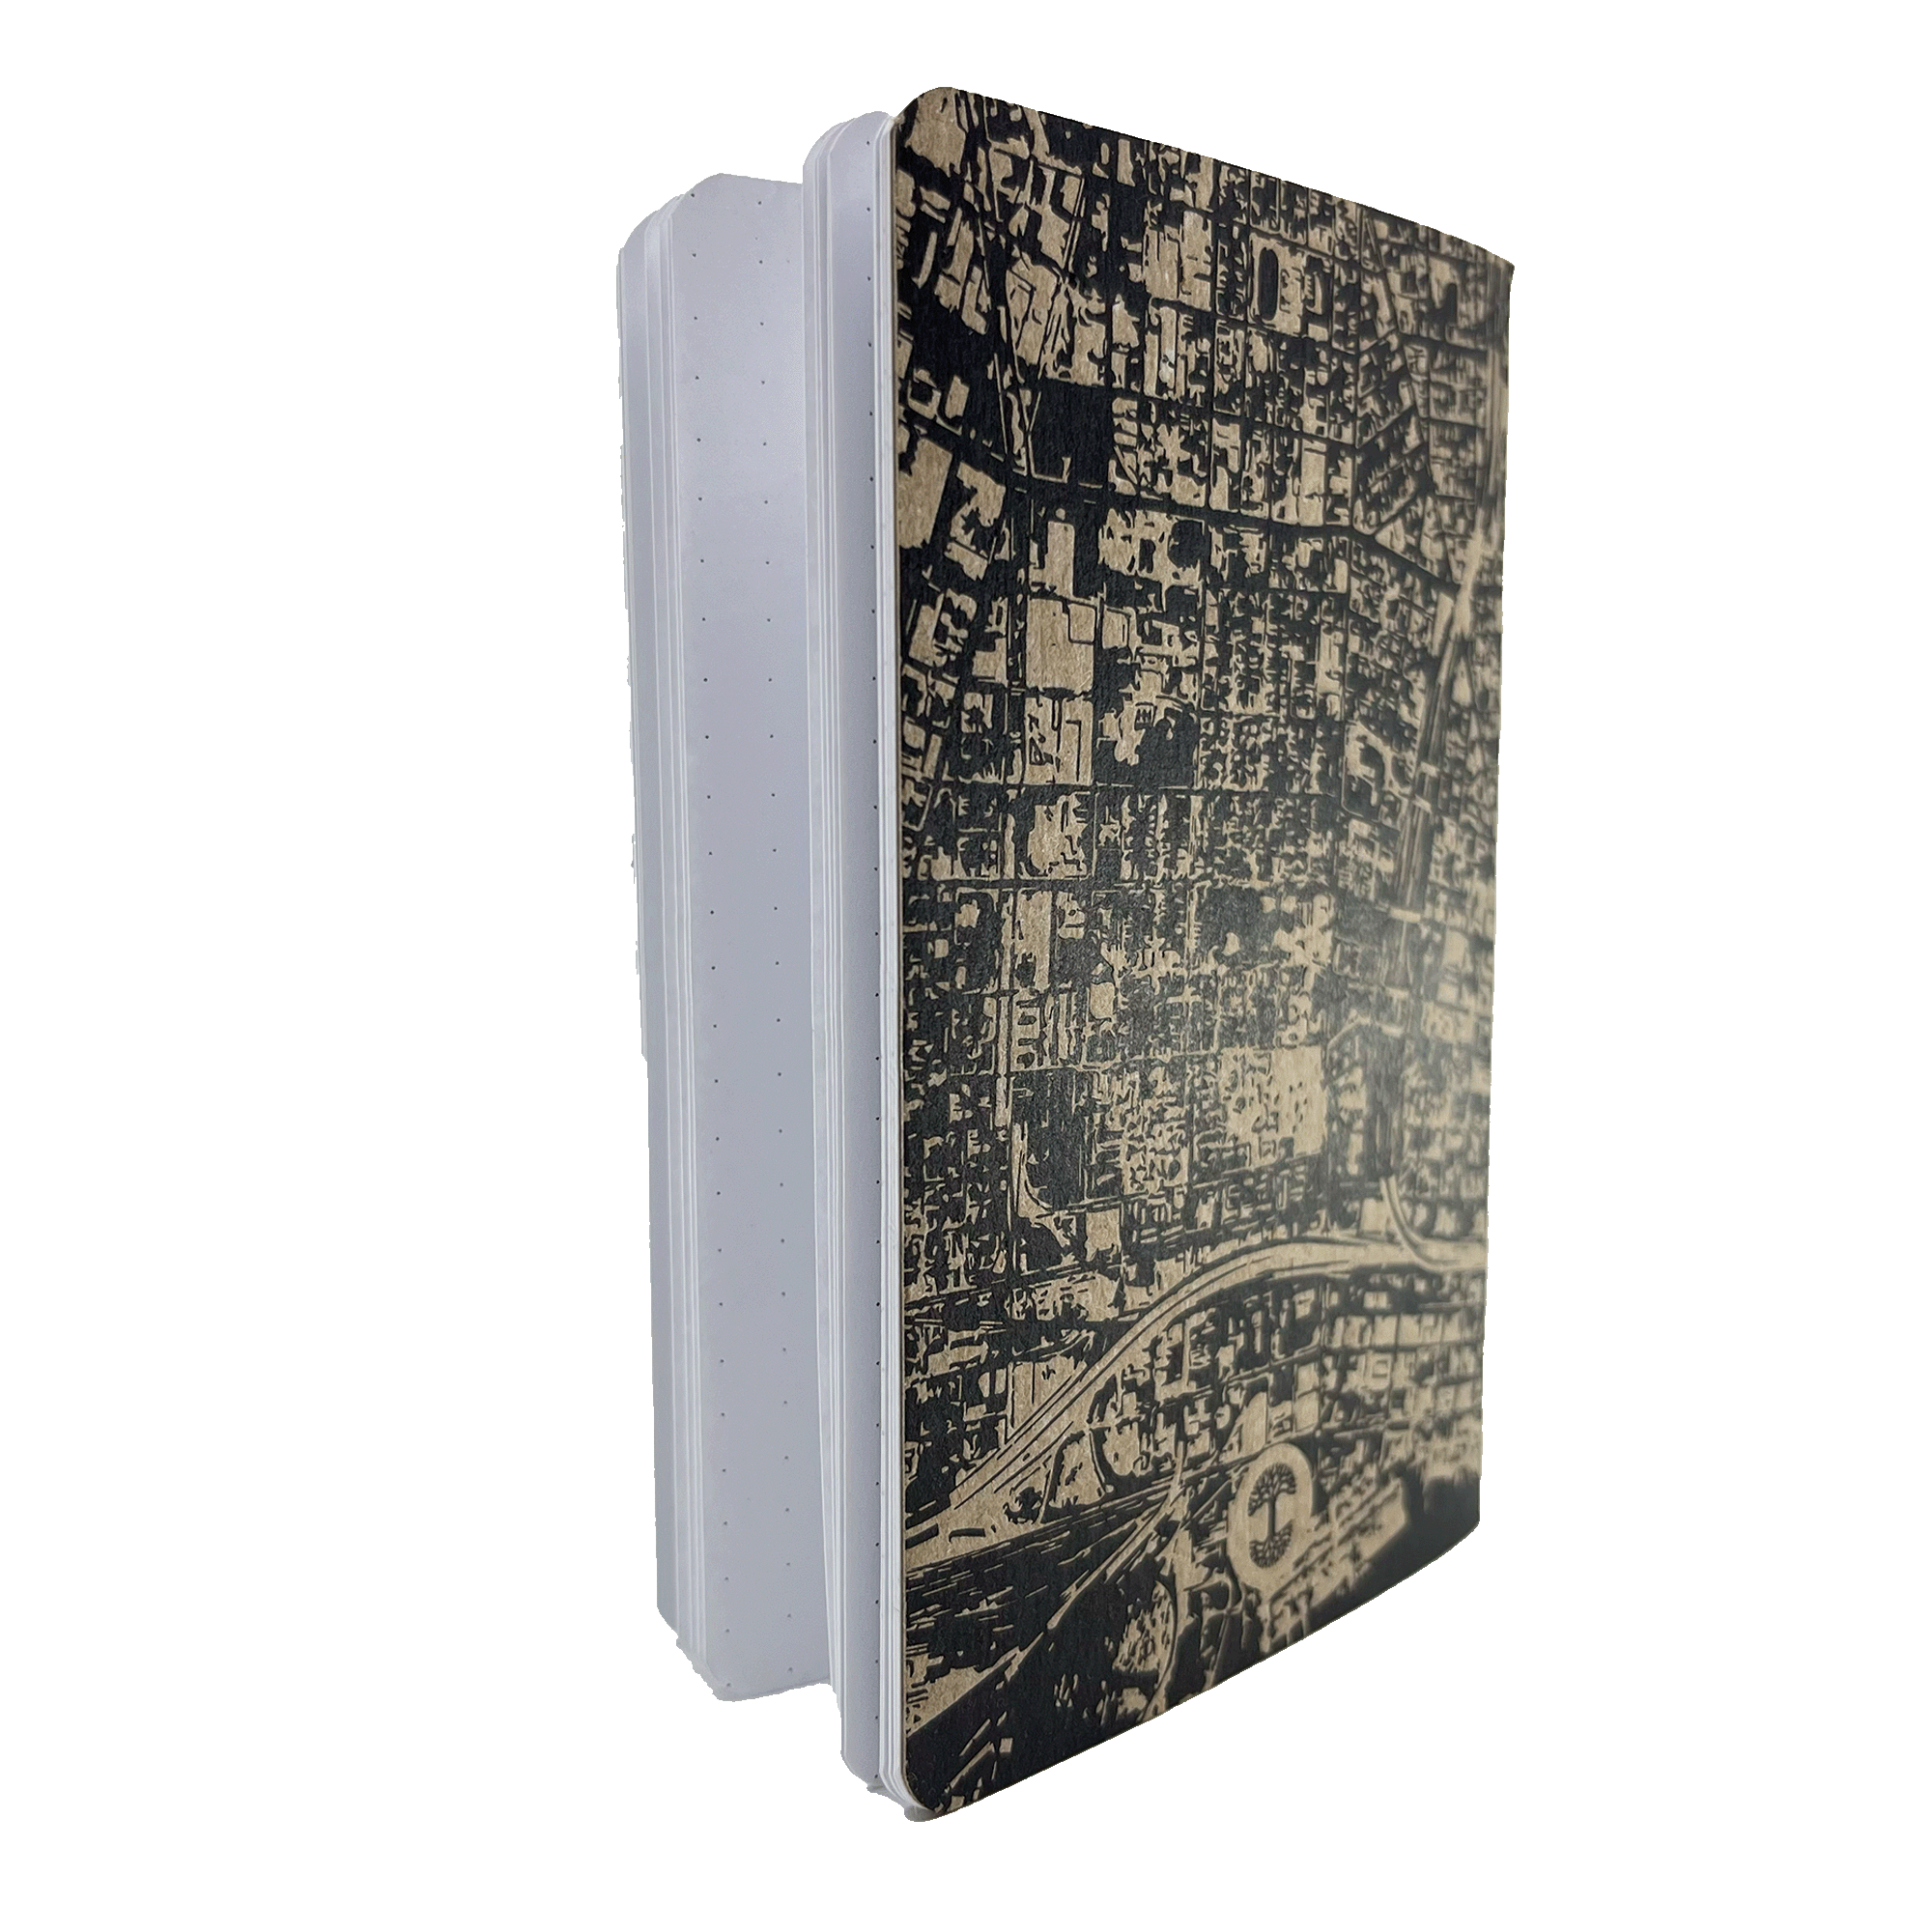 Back and side view of mini notebook with aerial map view of Oakland on cover.